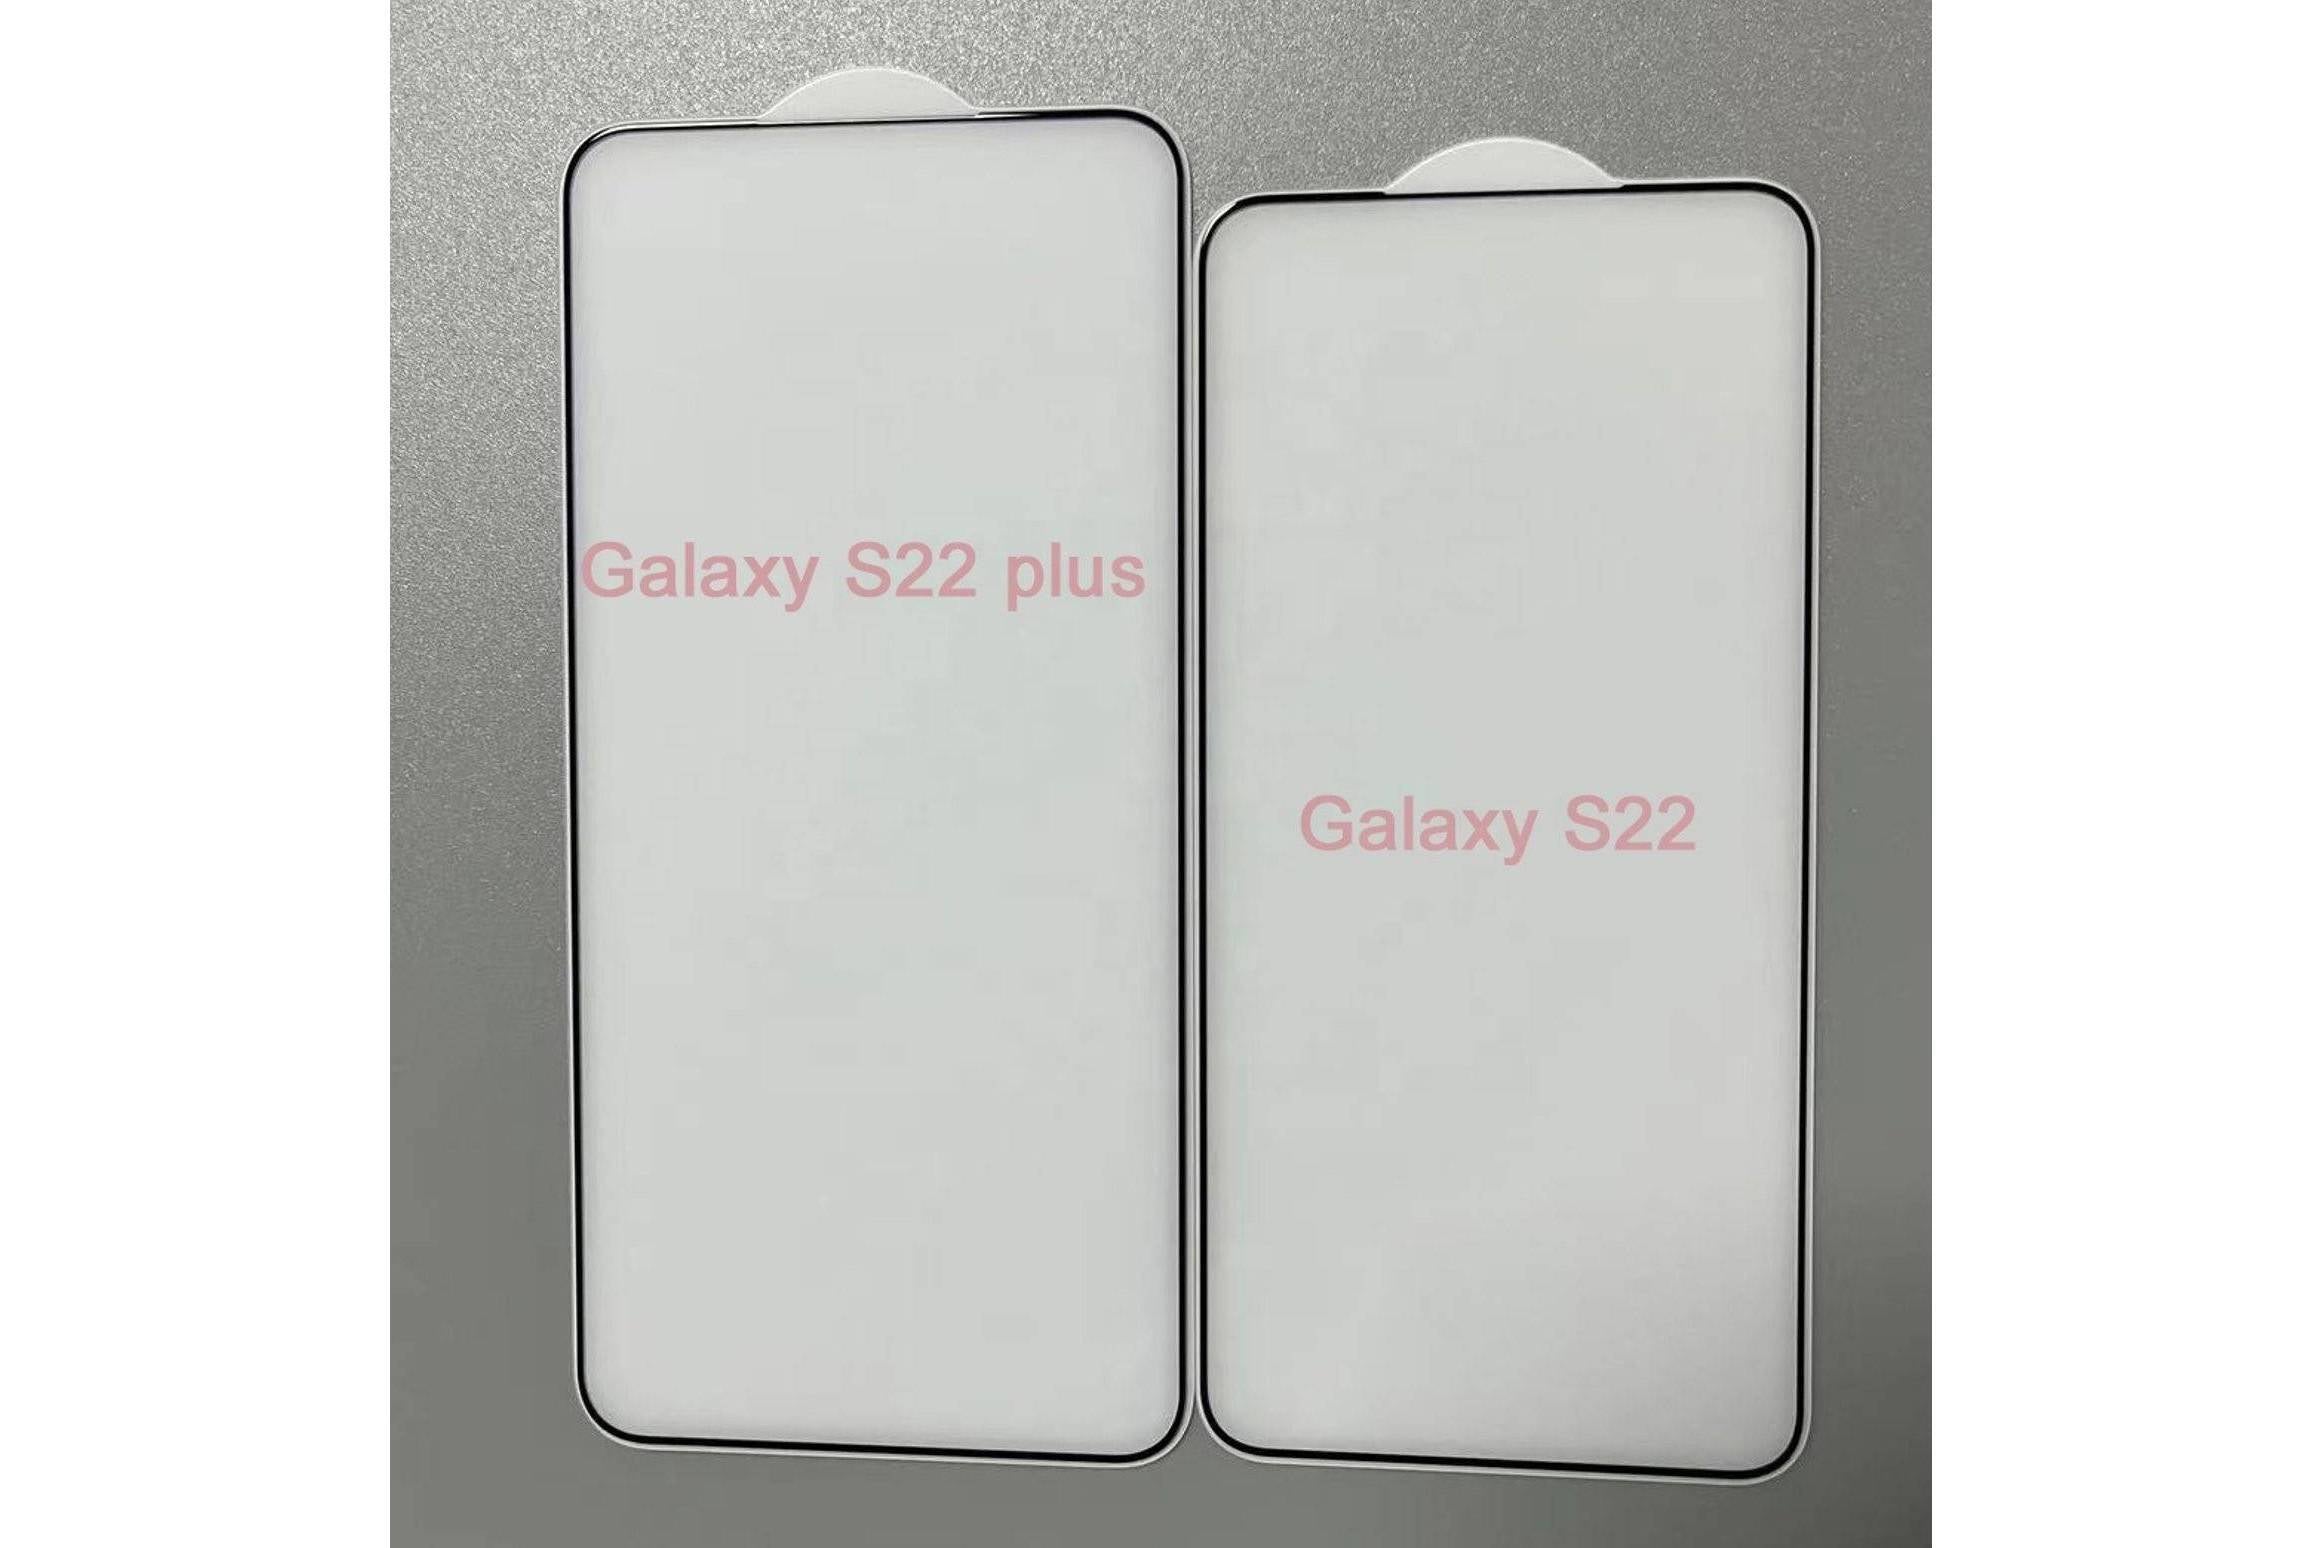 The Galaxy S22 and S22 Plus will likely not have the same design as the Ultra - Galaxy S22 Ultra will likely support blazing fast charging after all